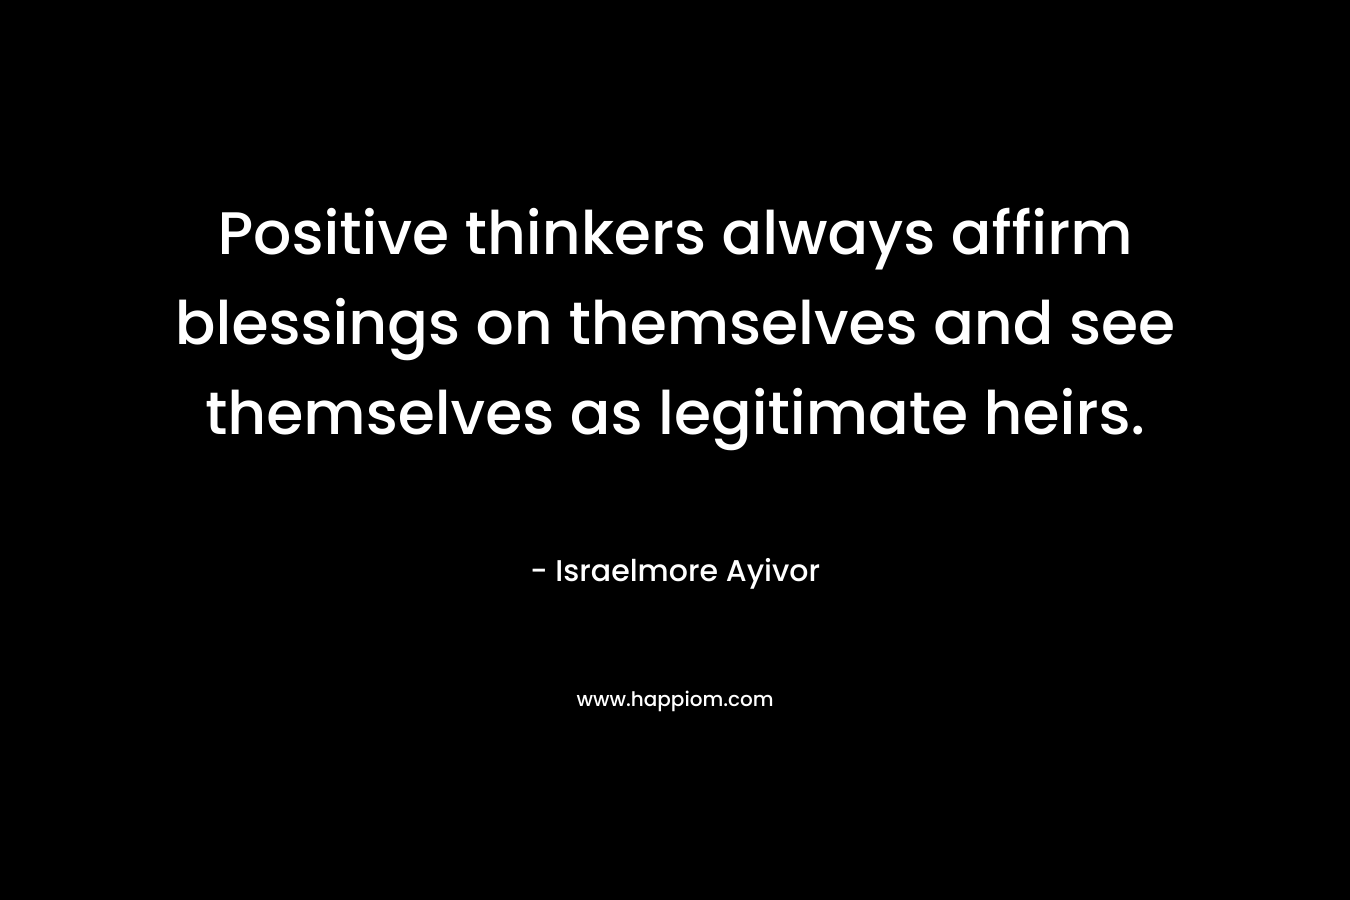 Positive thinkers always affirm blessings on themselves and see themselves as legitimate heirs.